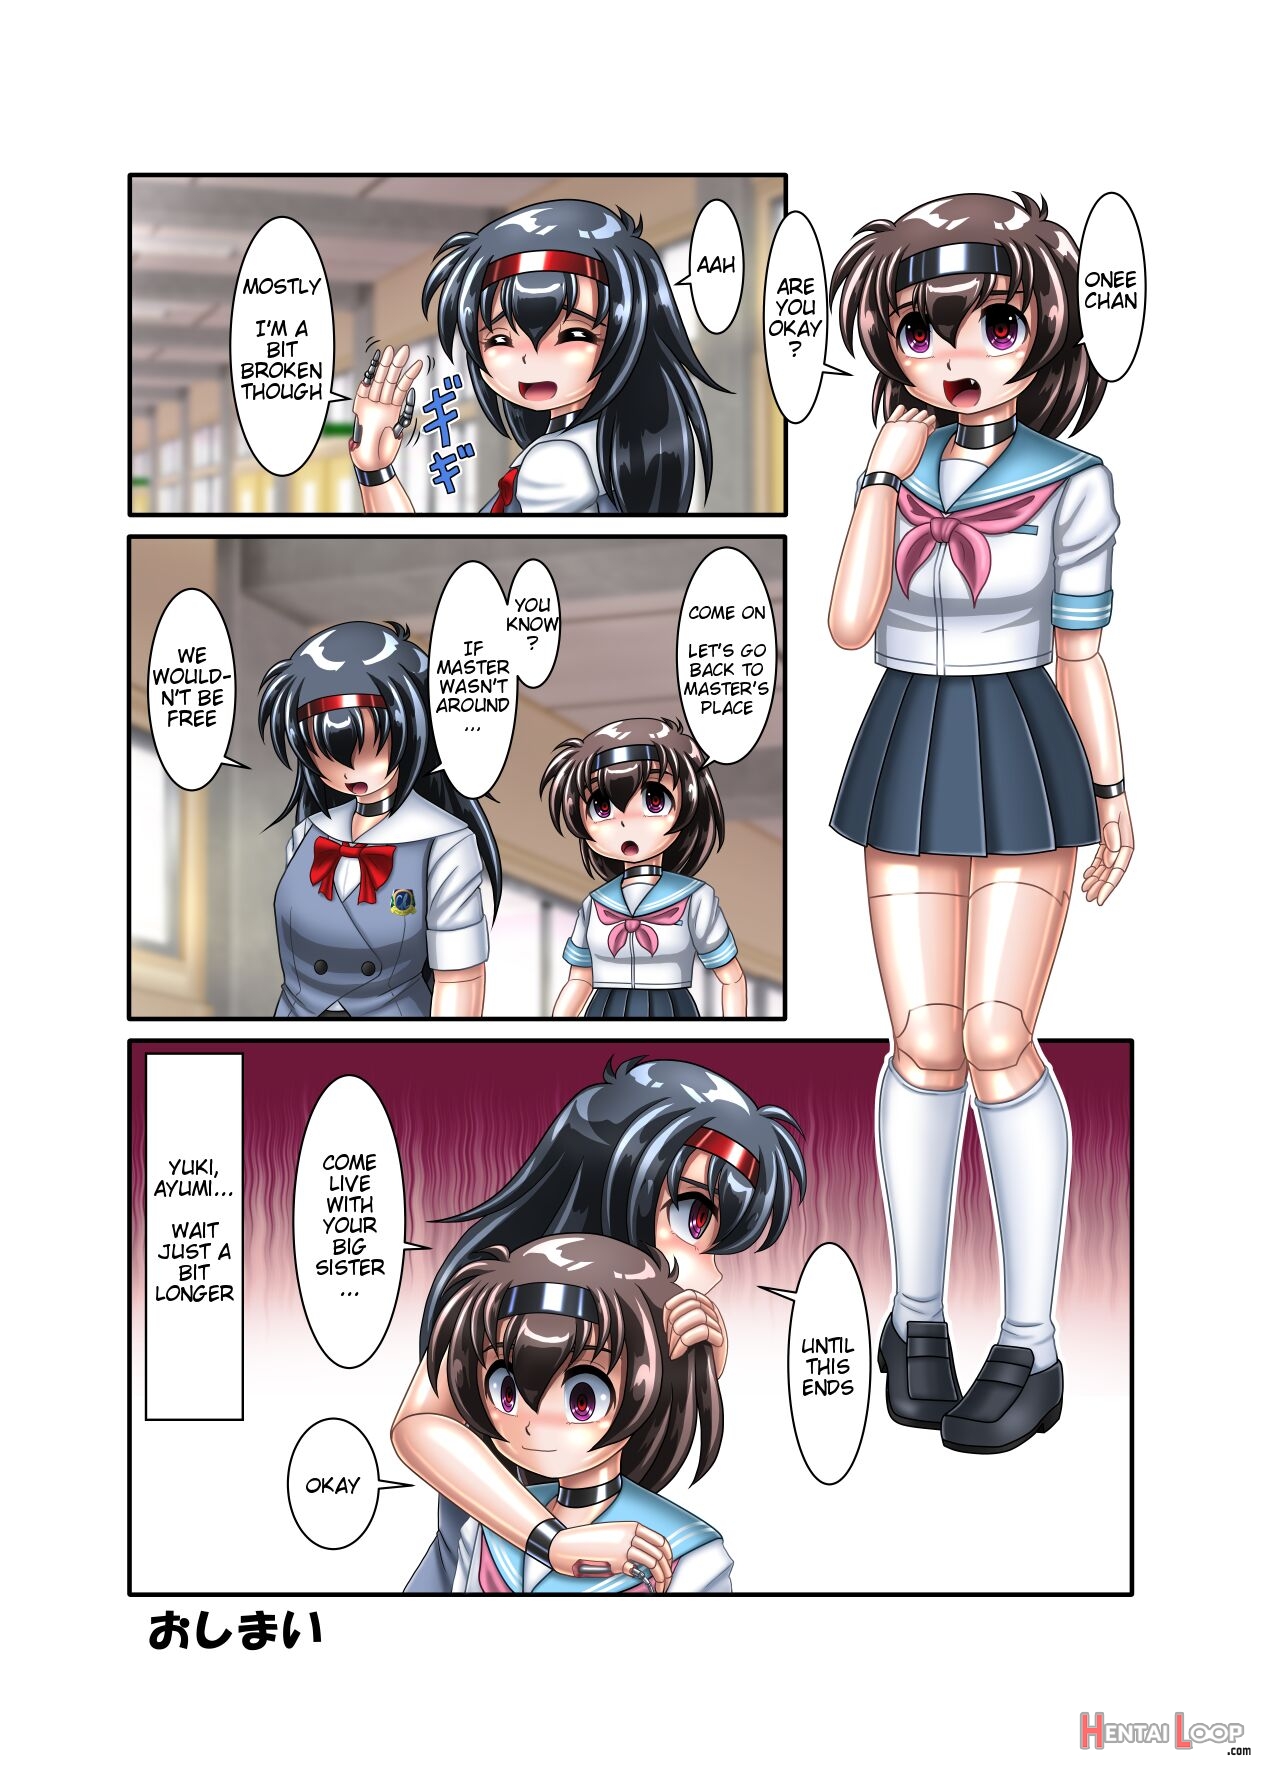 Hatsumi's 3 Long Weeks page 20